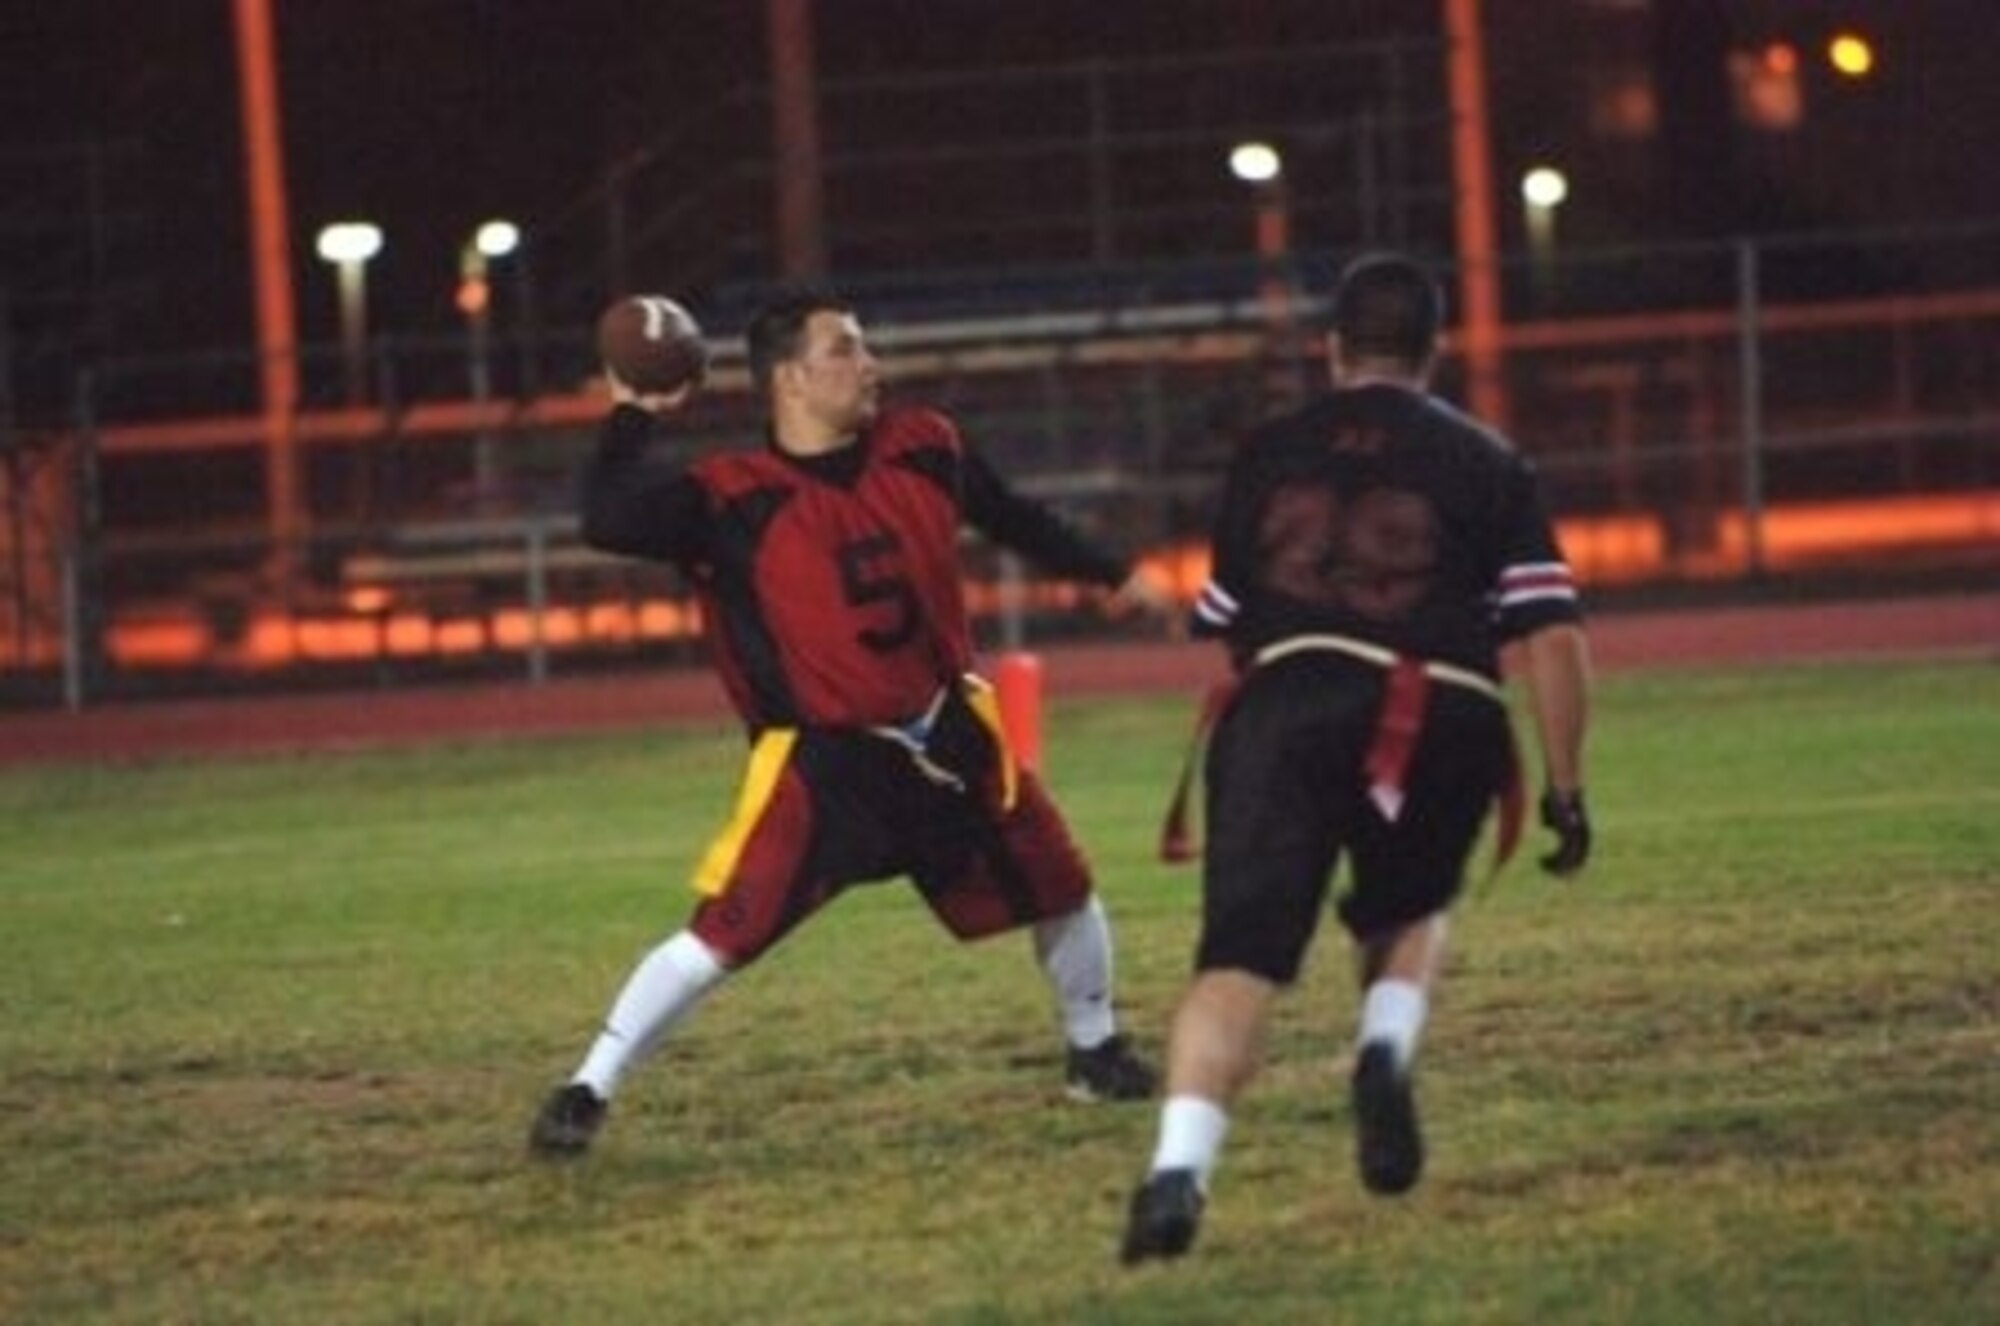 Mike Averill, 728th Air Mobility Squadron quarterback, drops back to pass the ball while under hot pursuit during a regular season flag-football game here. (Courtesy photo)